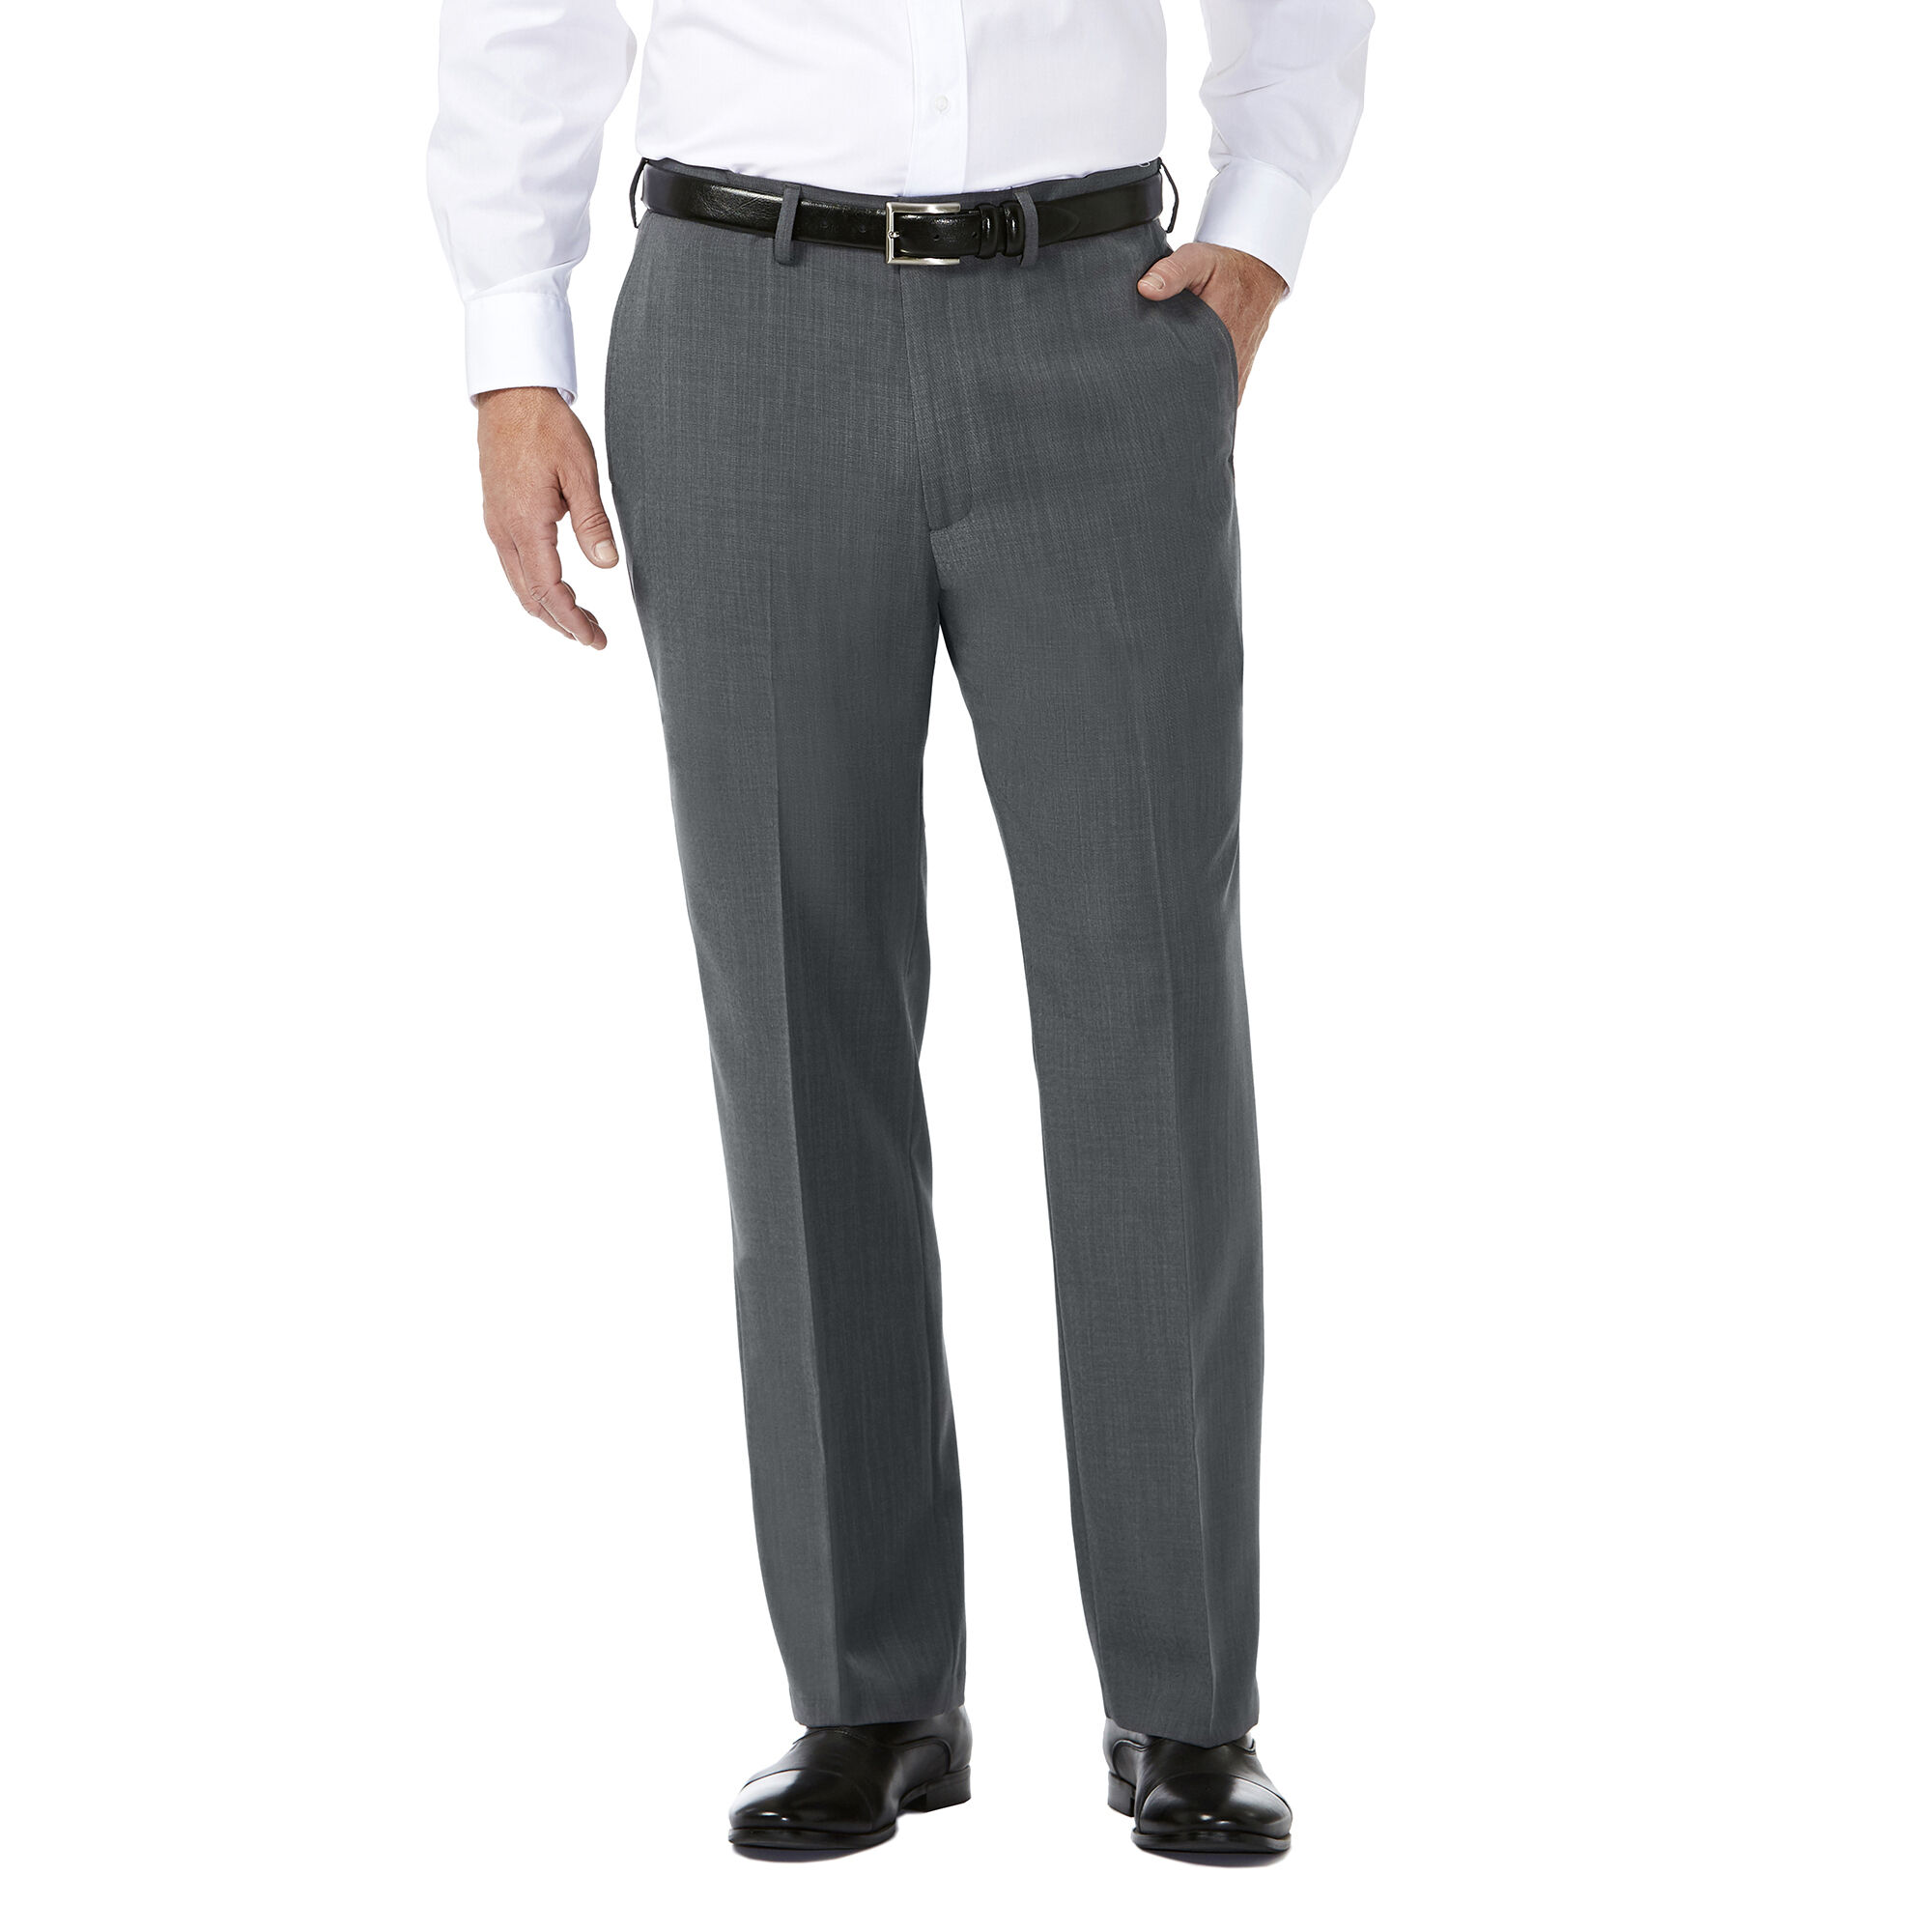 Haggar Travel Performance Suit Separates Pant - Tic Weave Graphite (HY00267 Clothing Pants) photo